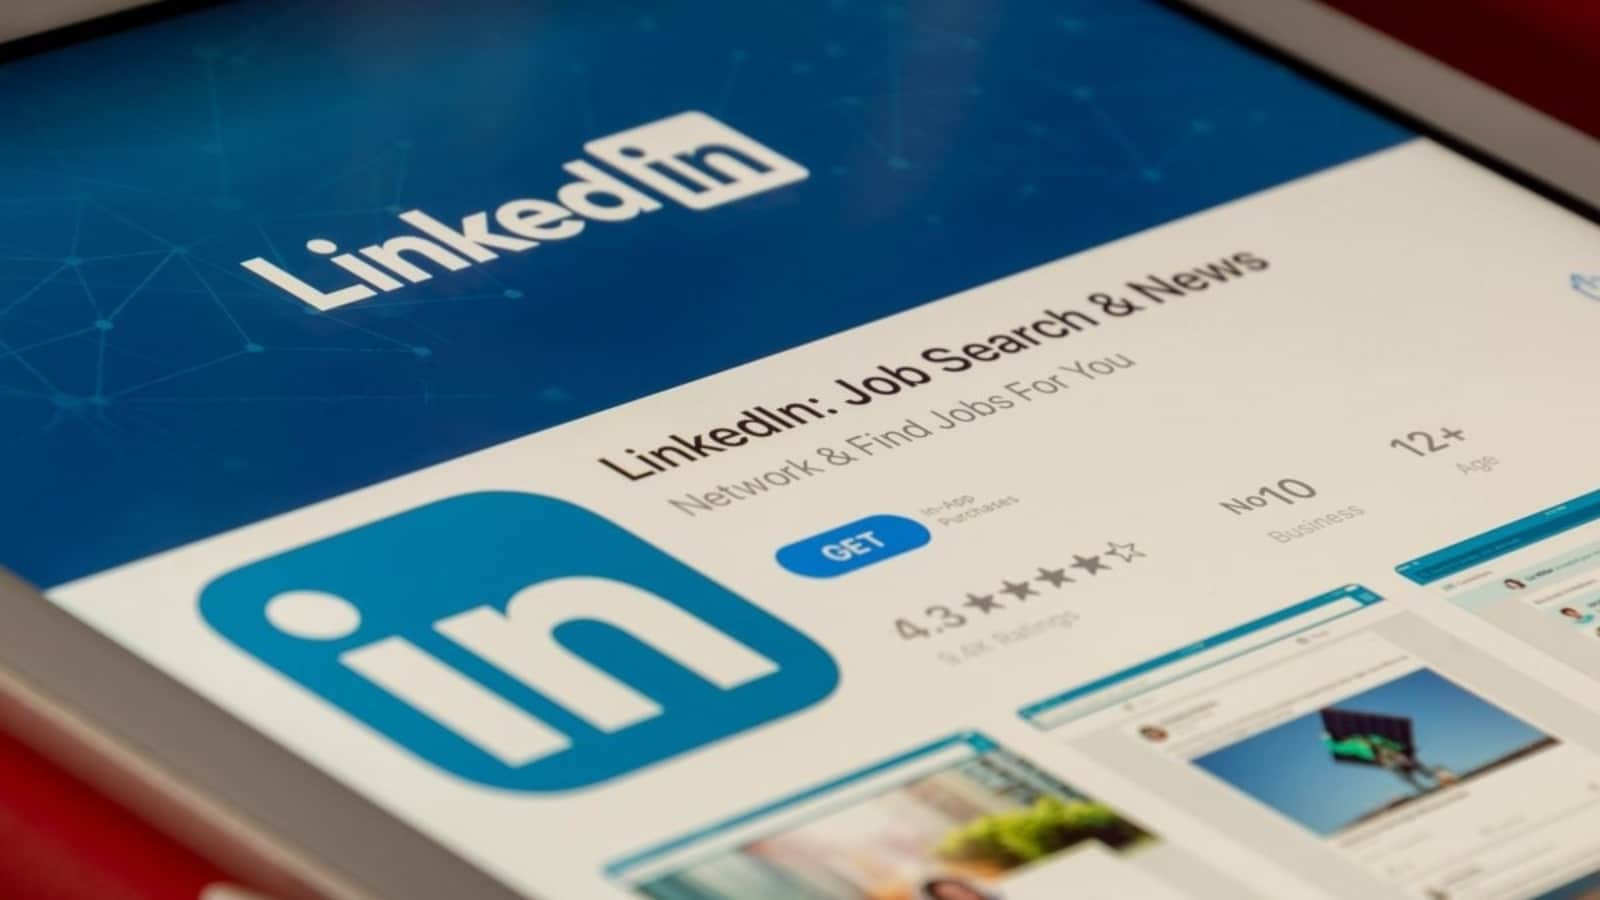 LinkedIn rolls out TikTok-like video feed for professionals; Know all about it